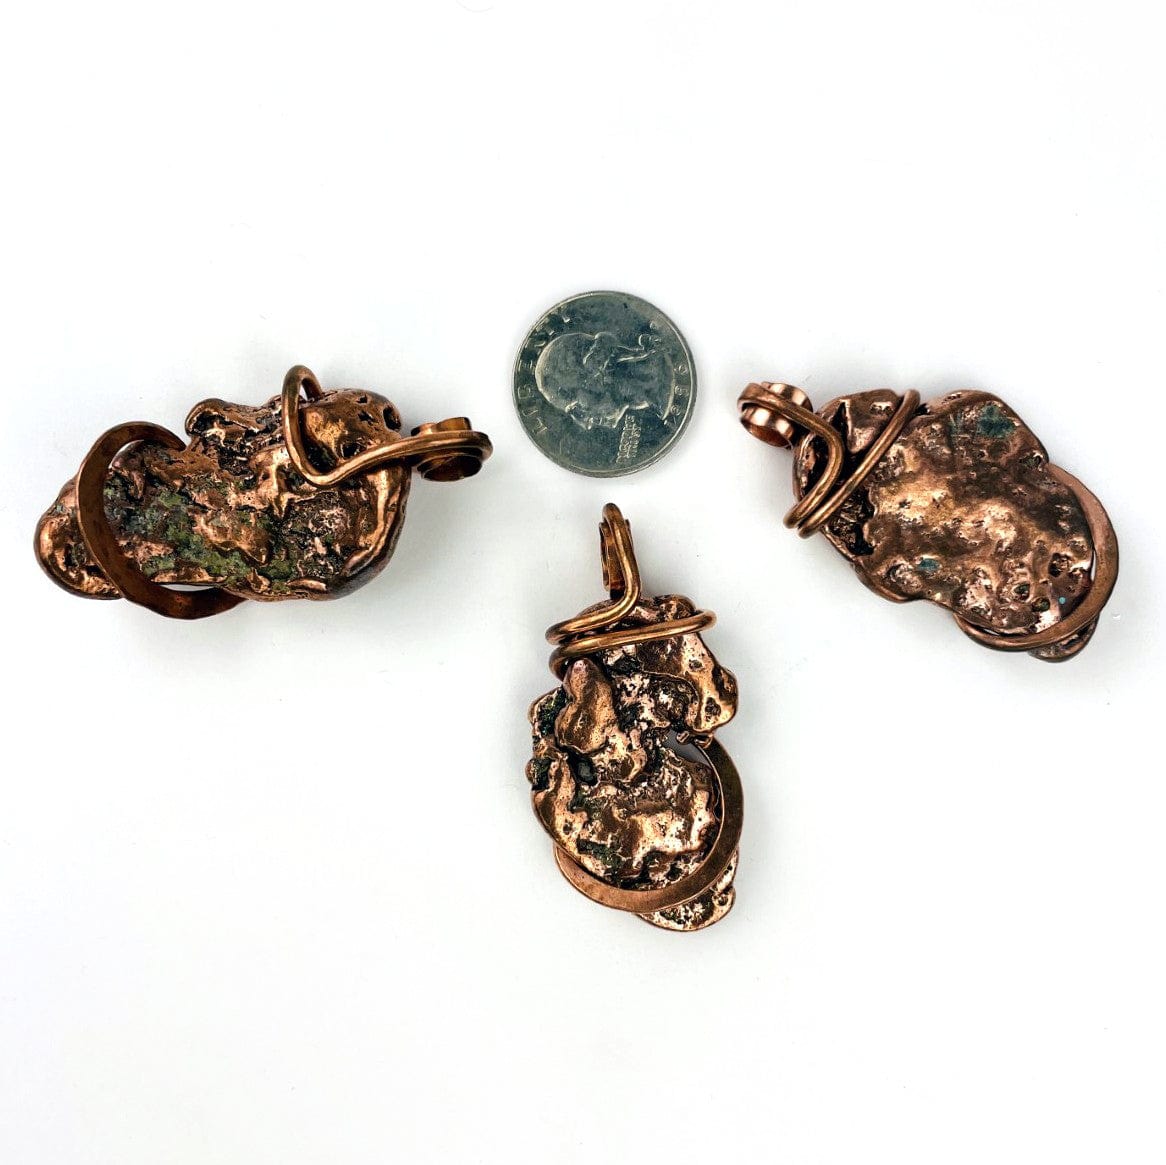 3 Copper Nugget freeform pendants with a quarter for size reference